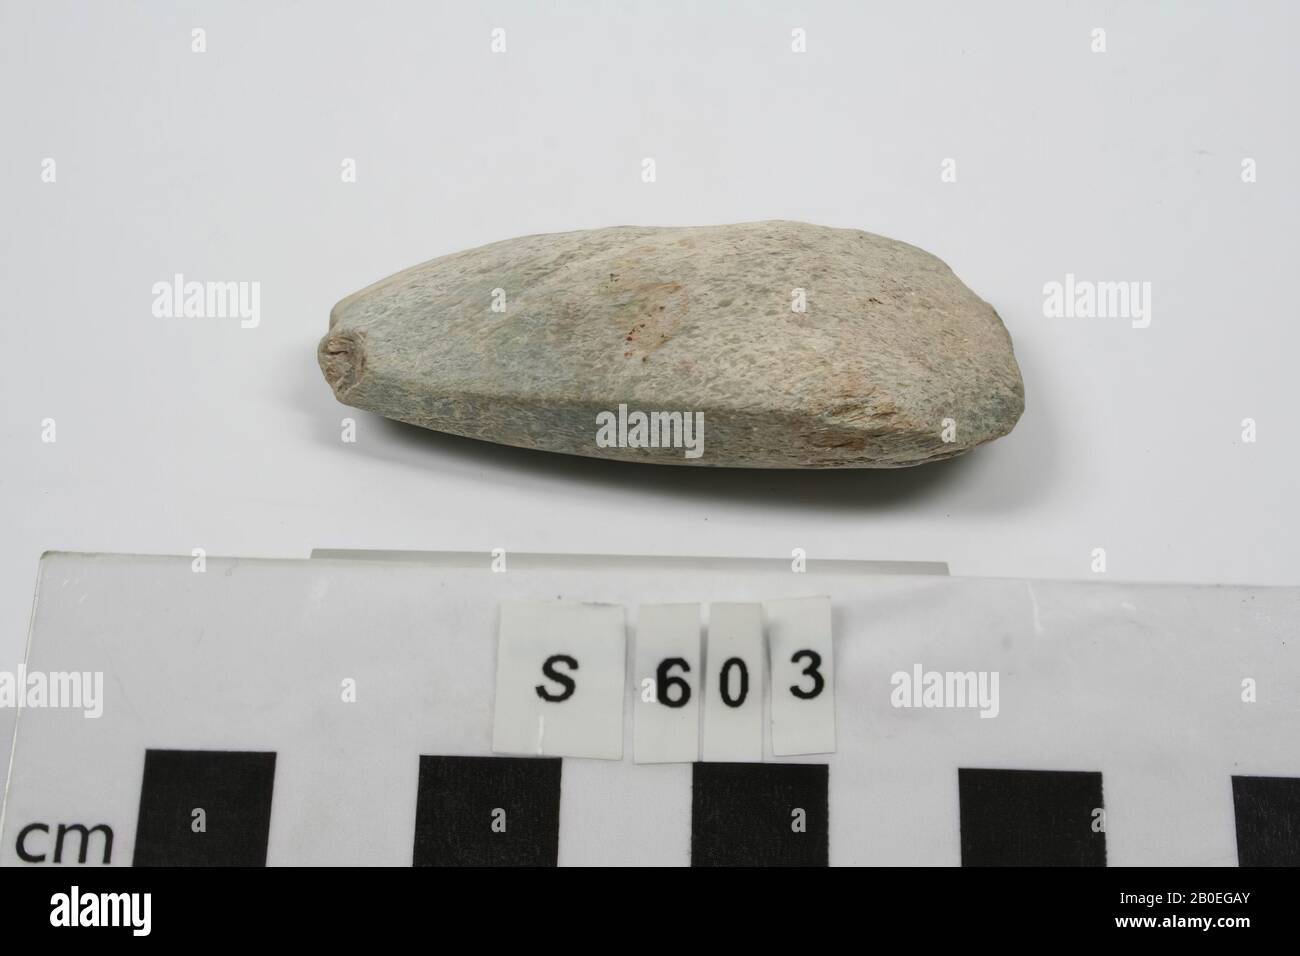 An oblong stone ax, wide-open to the cut., Tools, weapon, stone, L 6.8 cm, Turkey Stock Photo